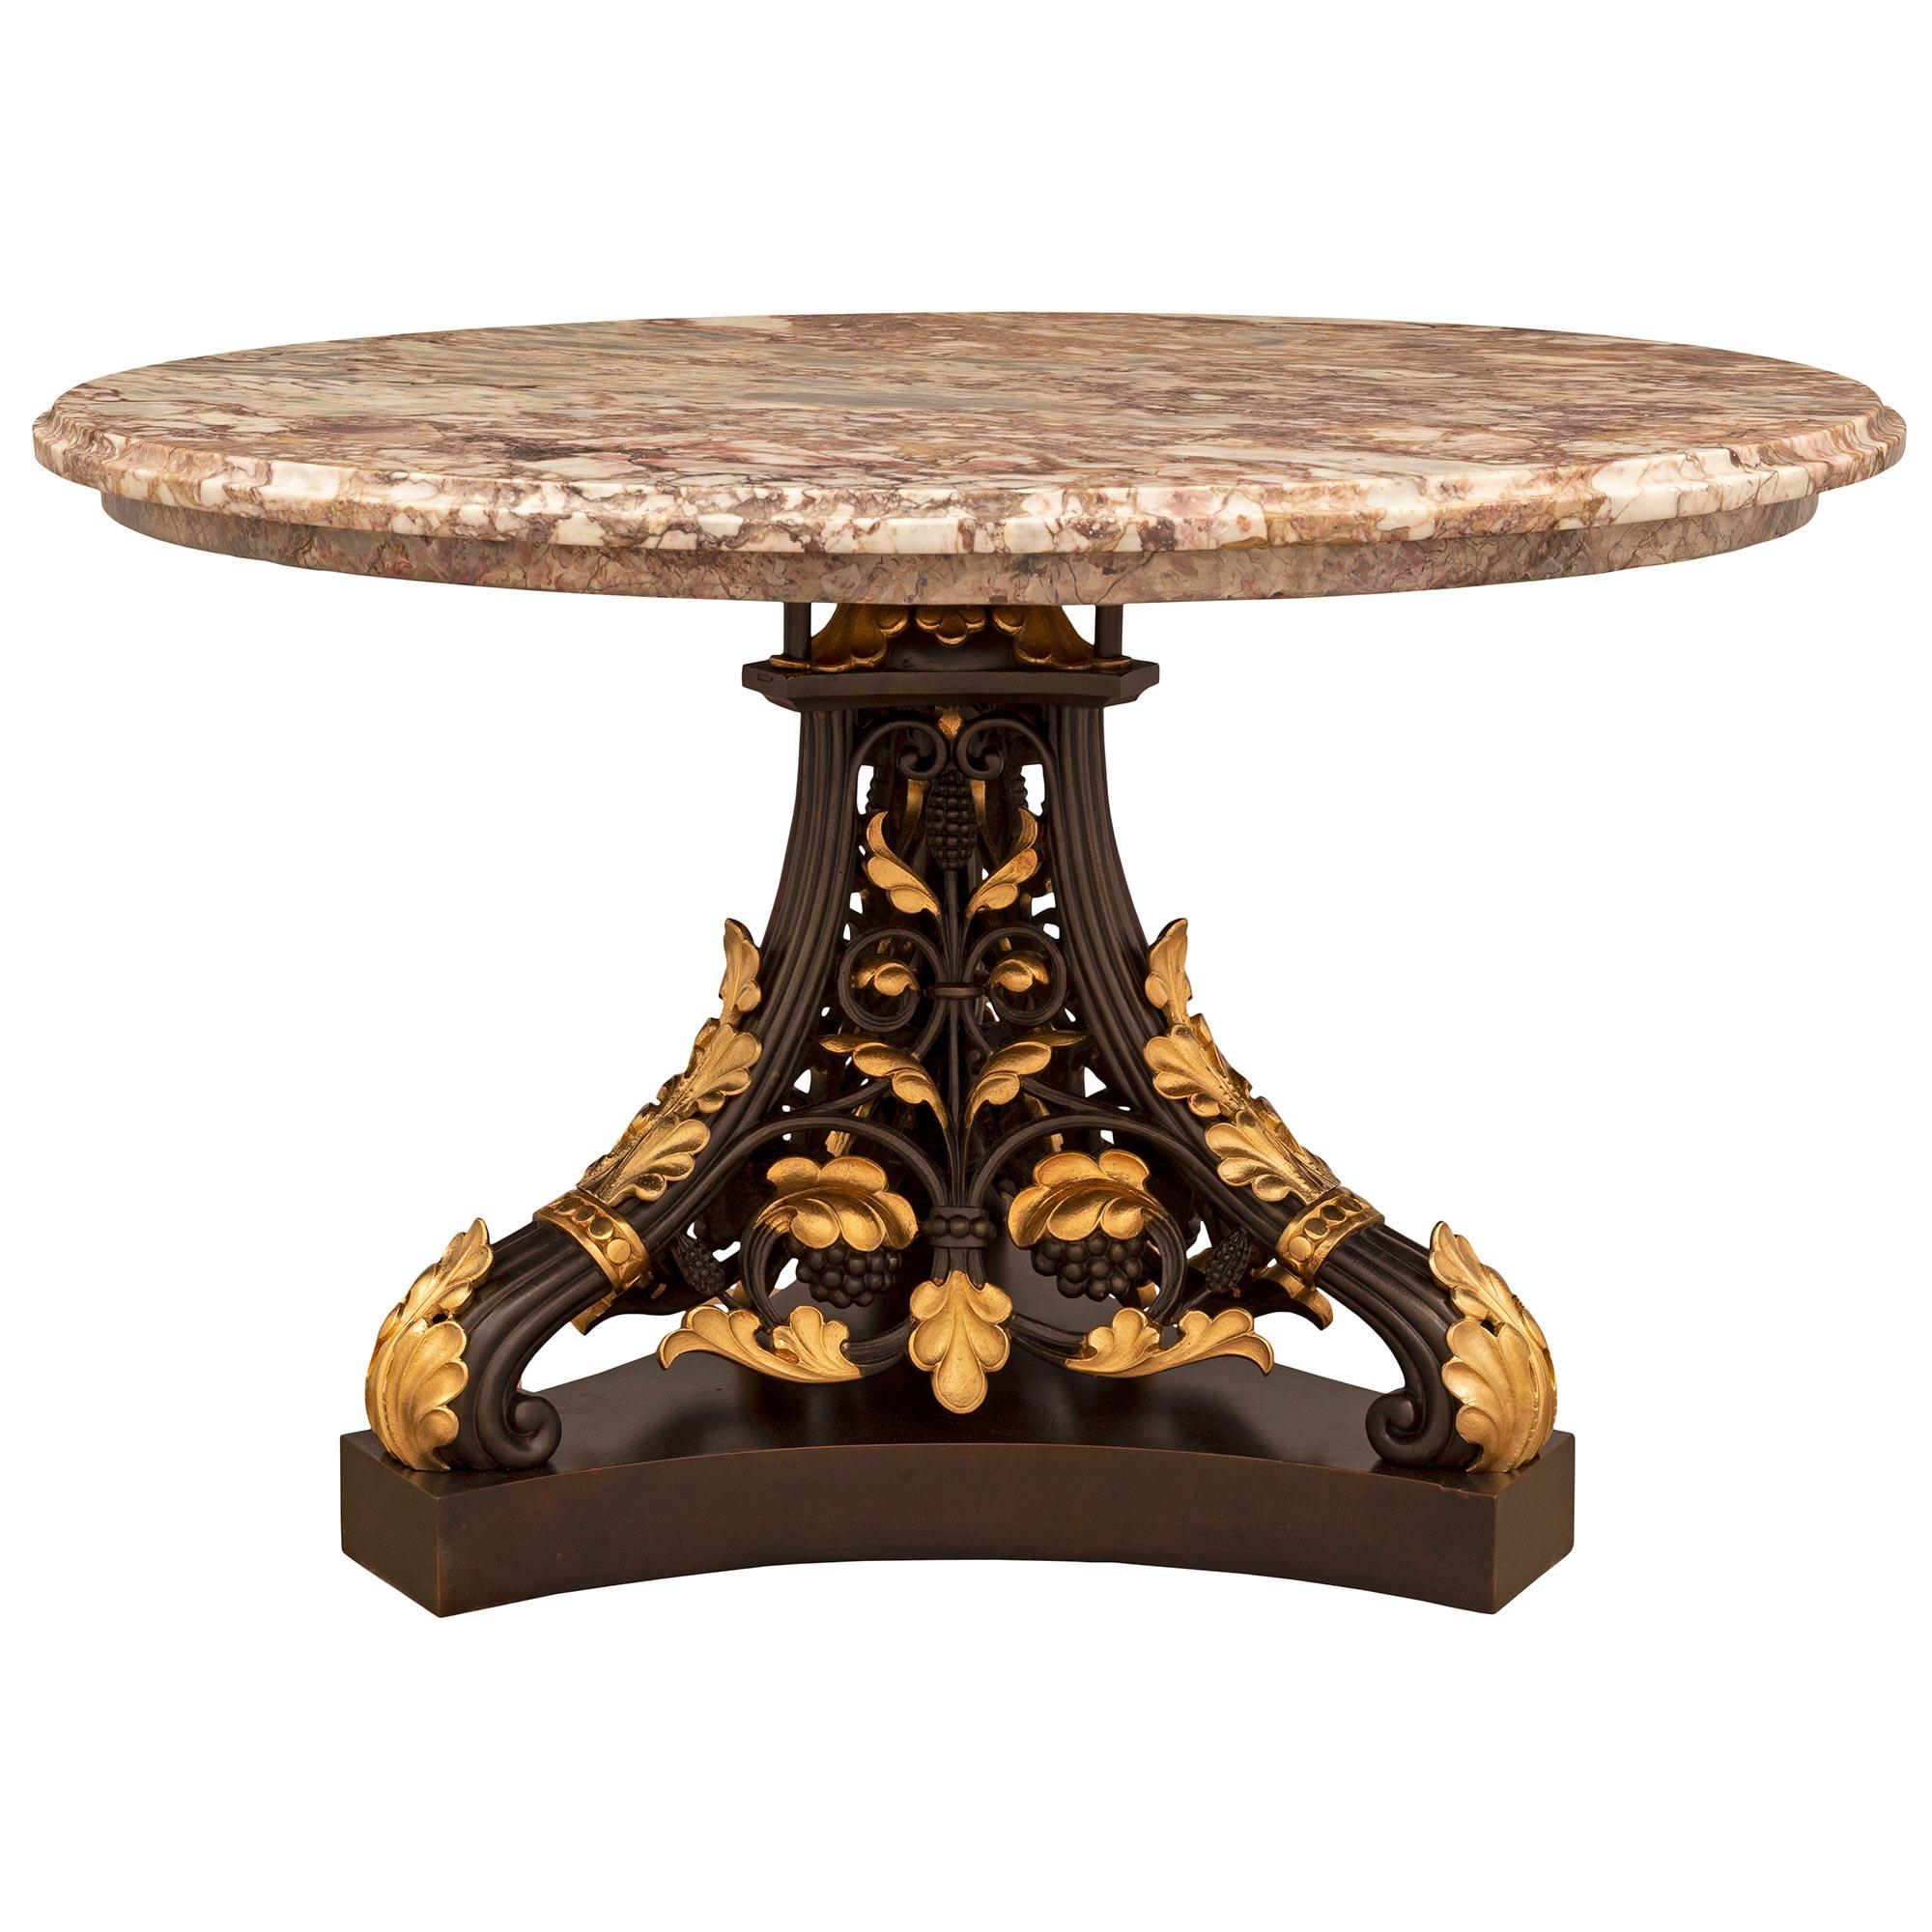 An outstanding and extremely decorative French 19th century Neo-Classical st. patinated bronze, ormolu, faux painted marble, and Sarrancolin marble cocktail/coffee table. The circular table is raised by a stunning triangular patinated bronze base